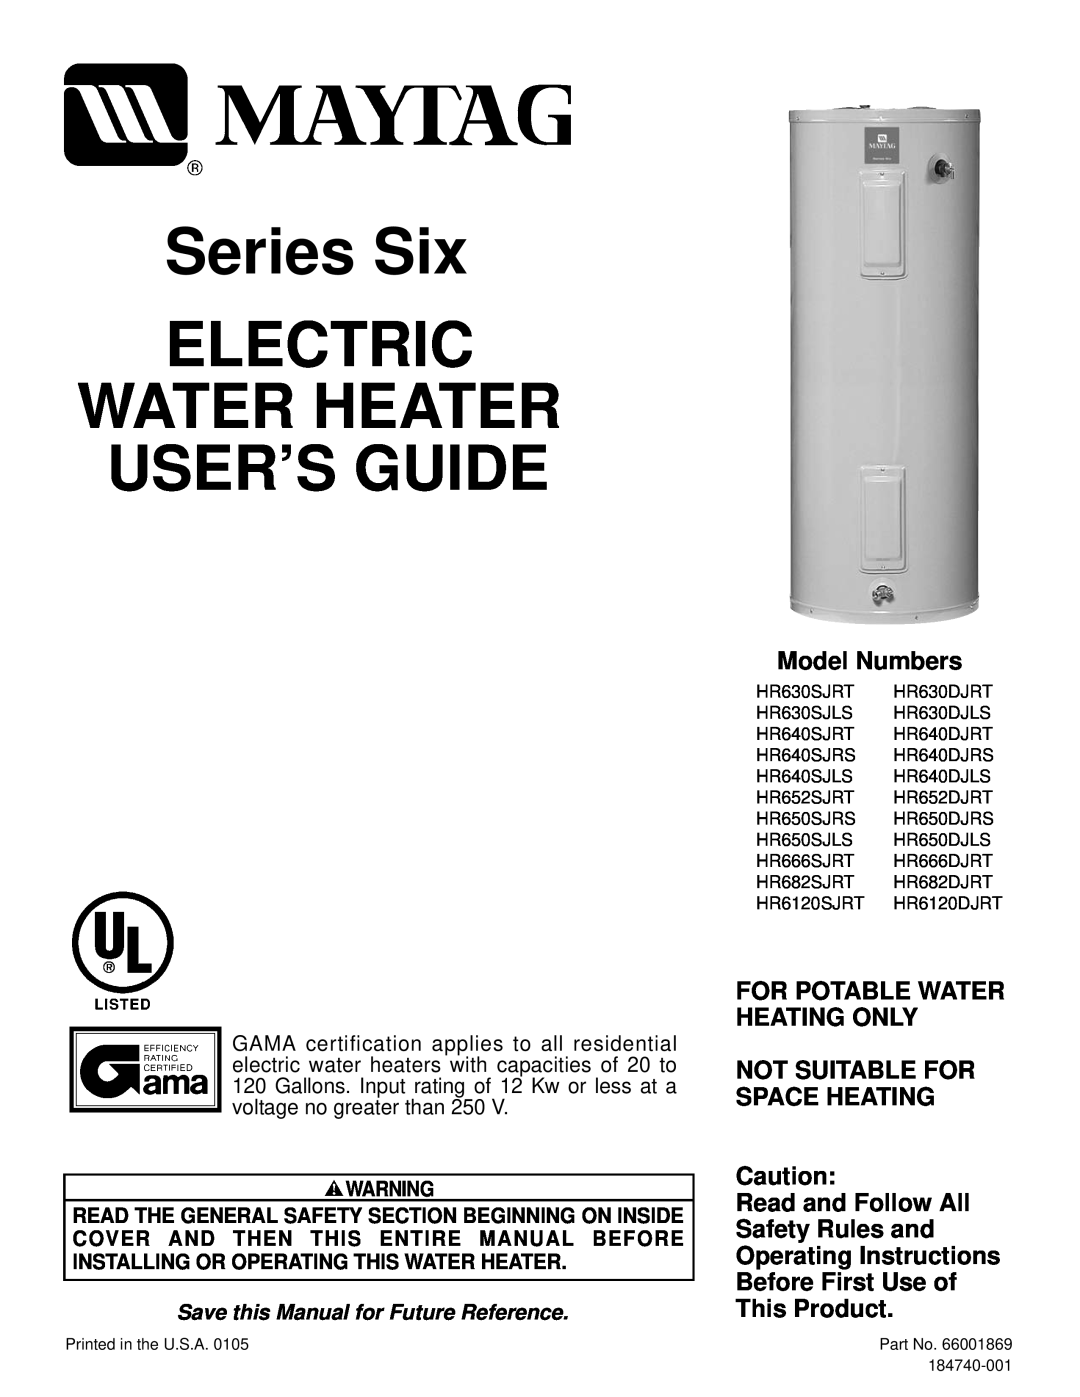 Maytag HR682SJRT manual Series Six, Electric, Water Heater User’S Guide, Model Numbers, This Product, 184740-001 